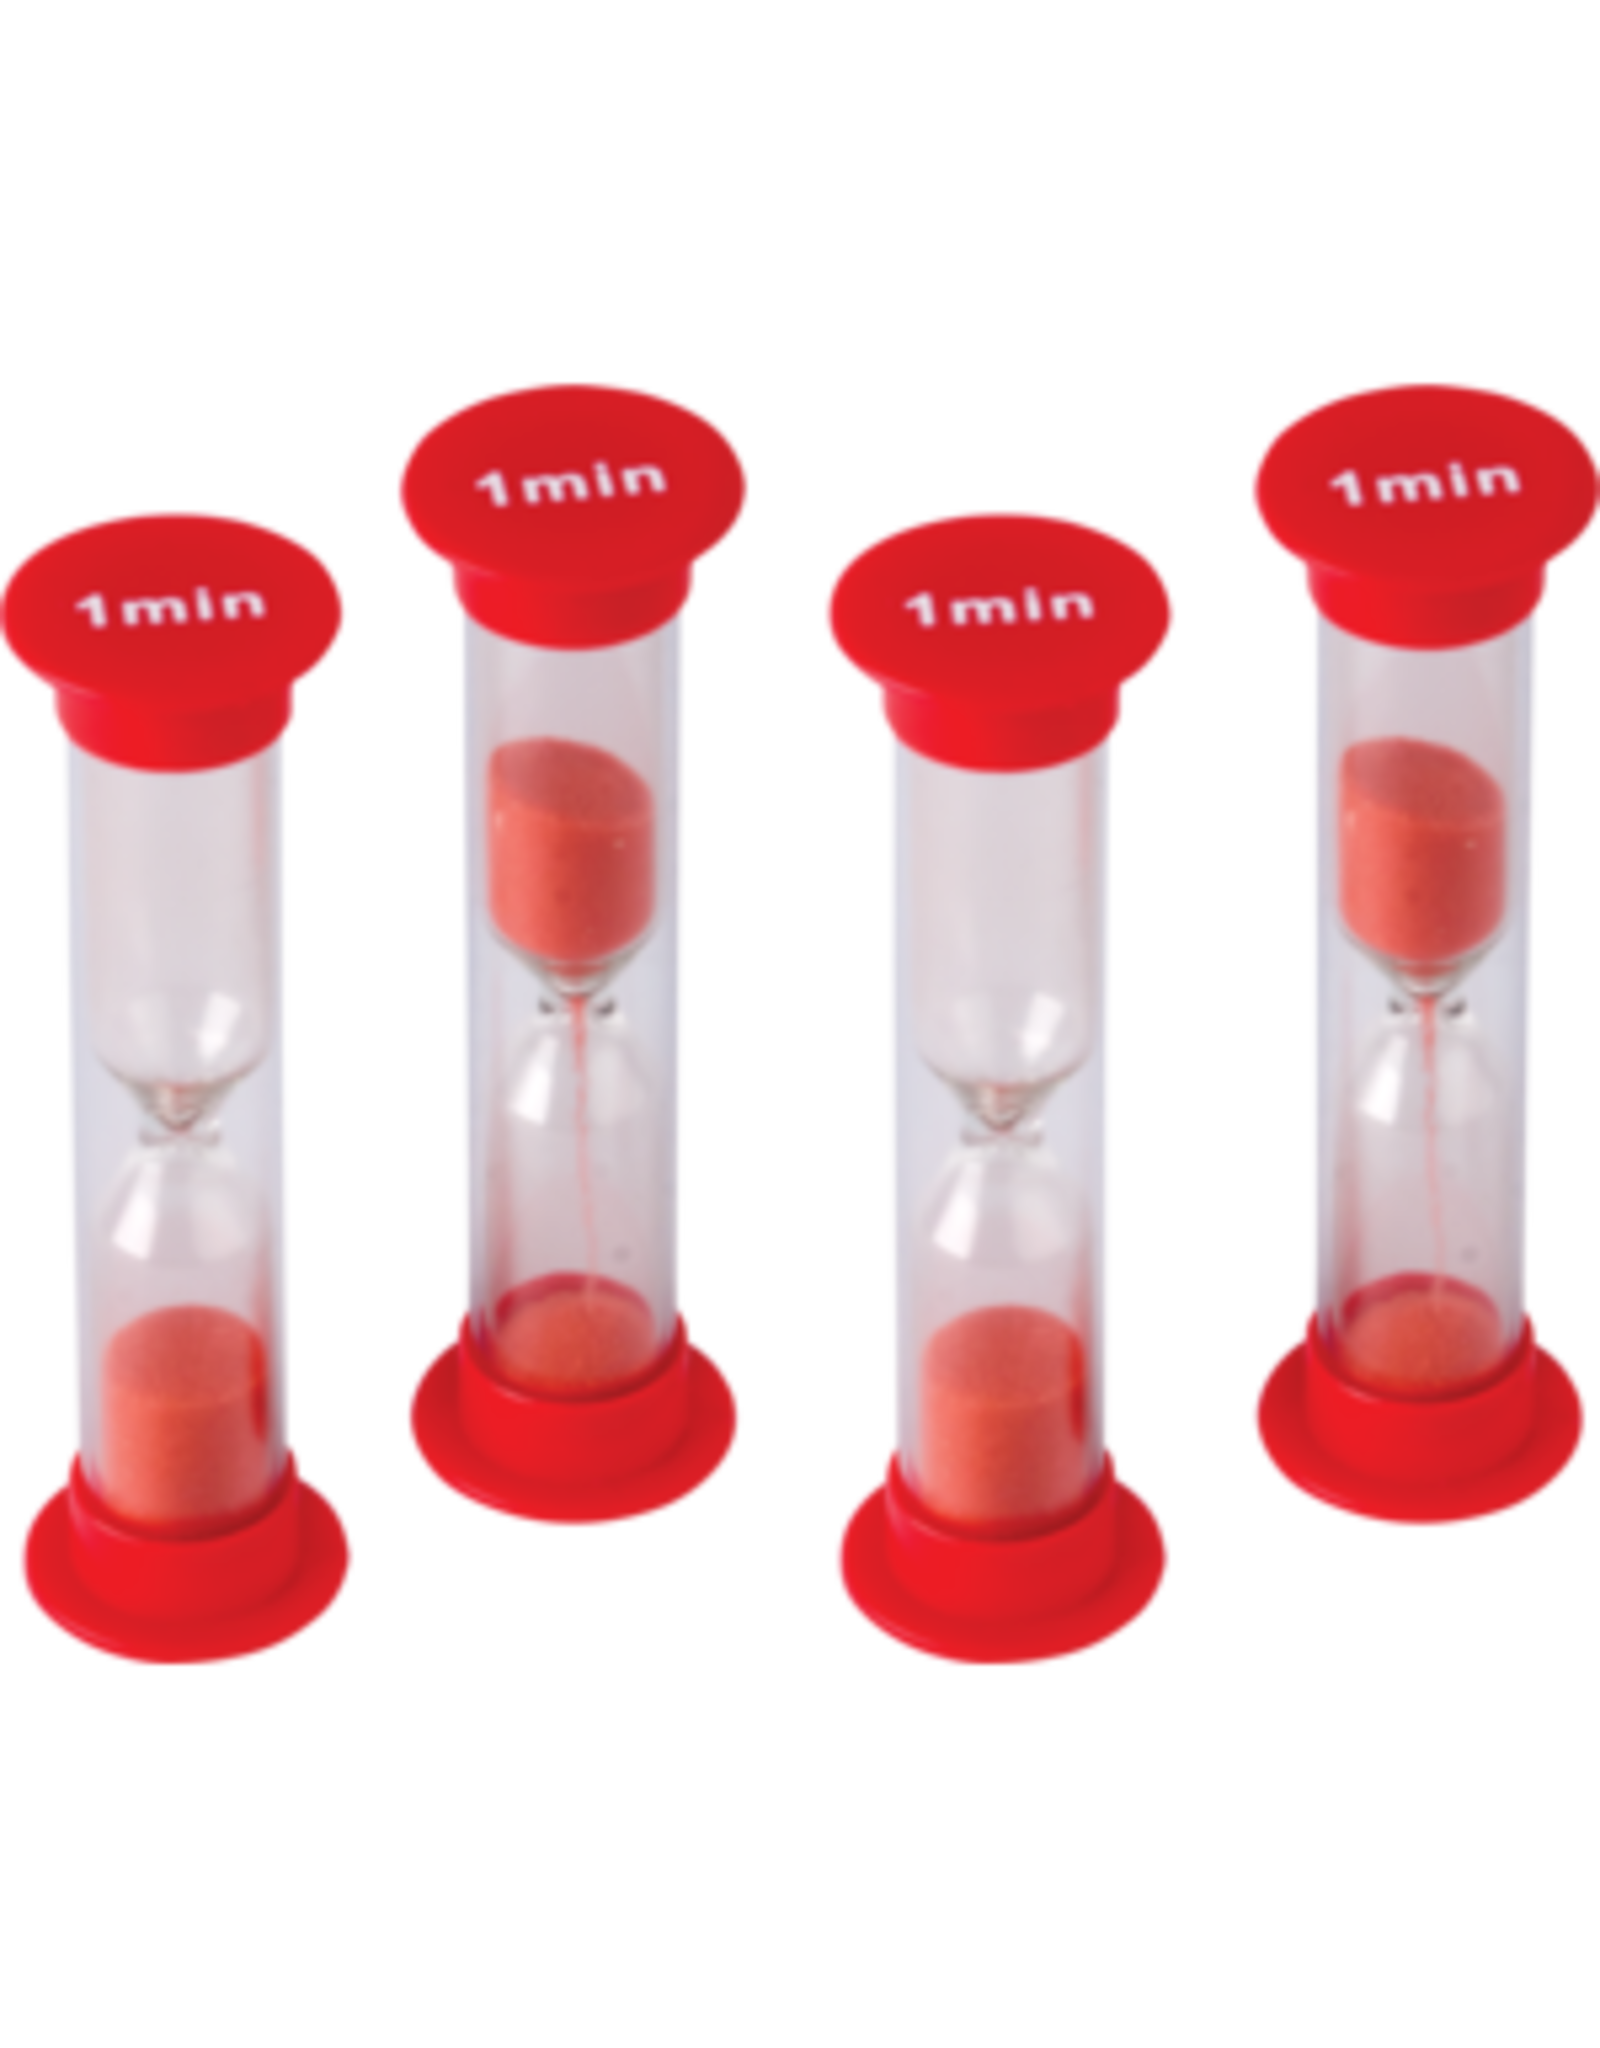 TCR 1 MINUTE SAND TIMERS -  4PC